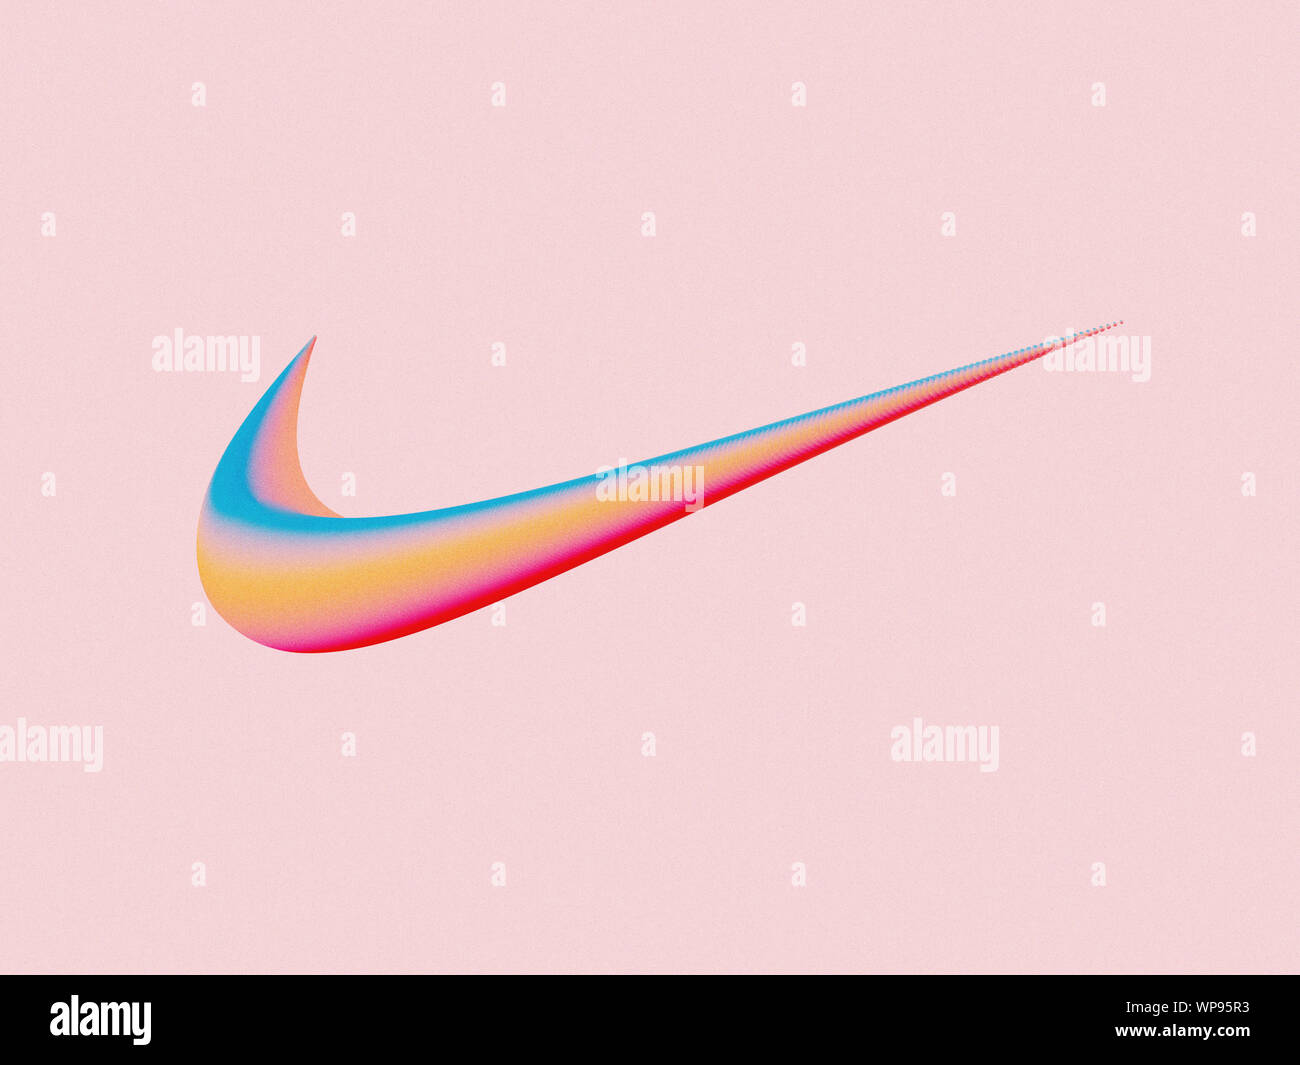 An artistic illustration of the Nike swoosh logo that made with vector  blending technique, and placed on a pink background Stock Photo - Alamy